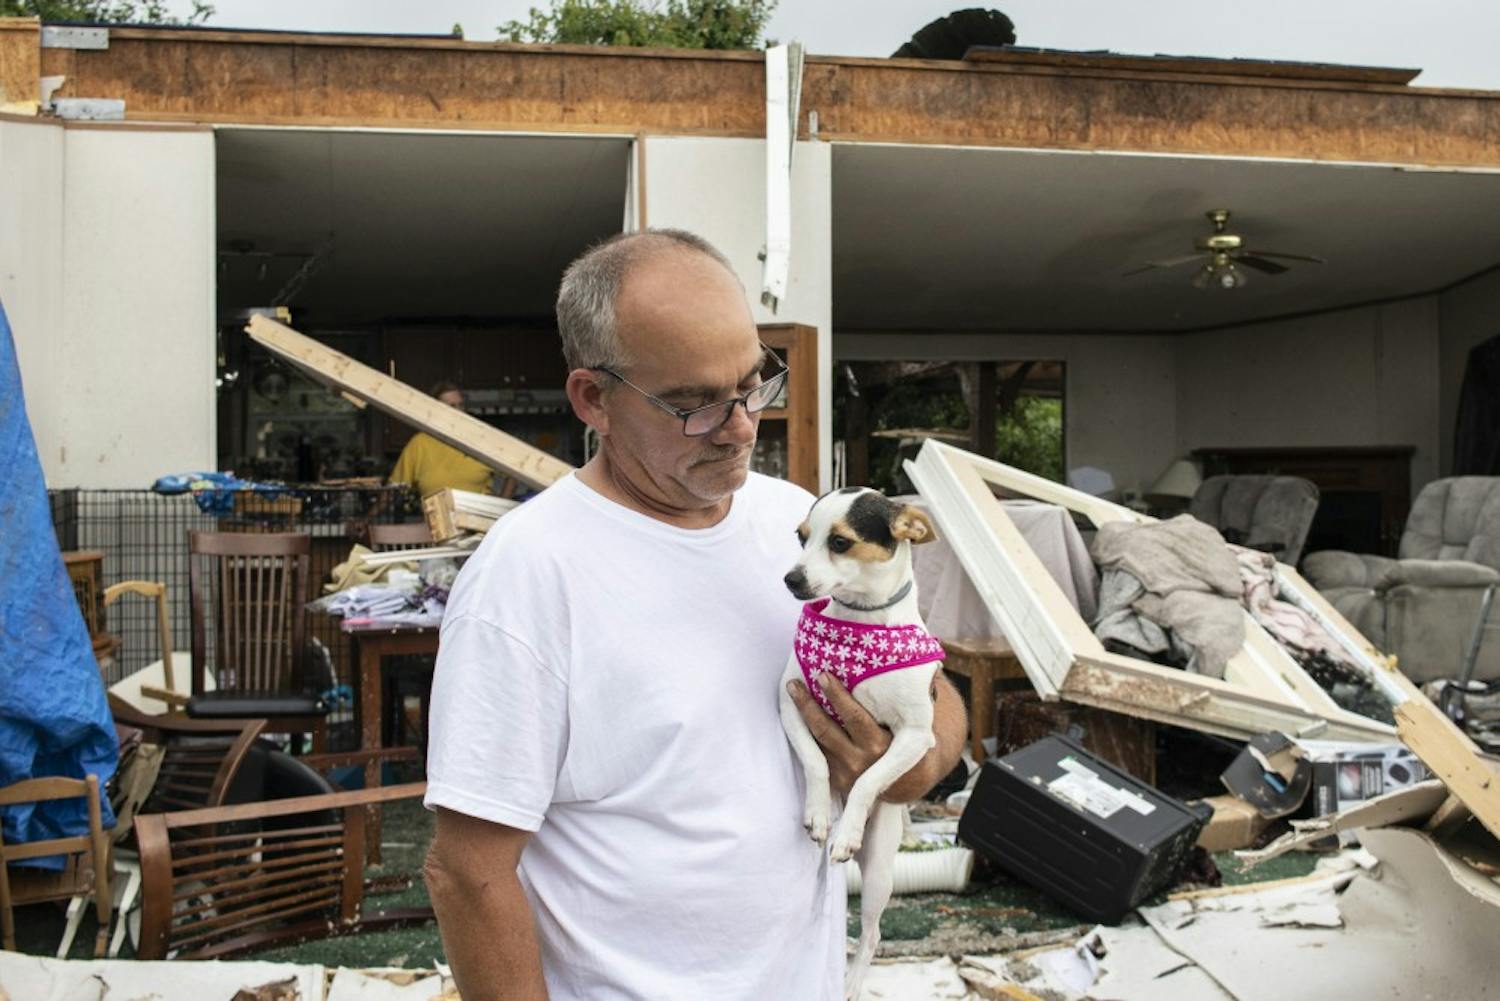 GALLERY: Monroe County residents struggle with loss in tornado's aftermath